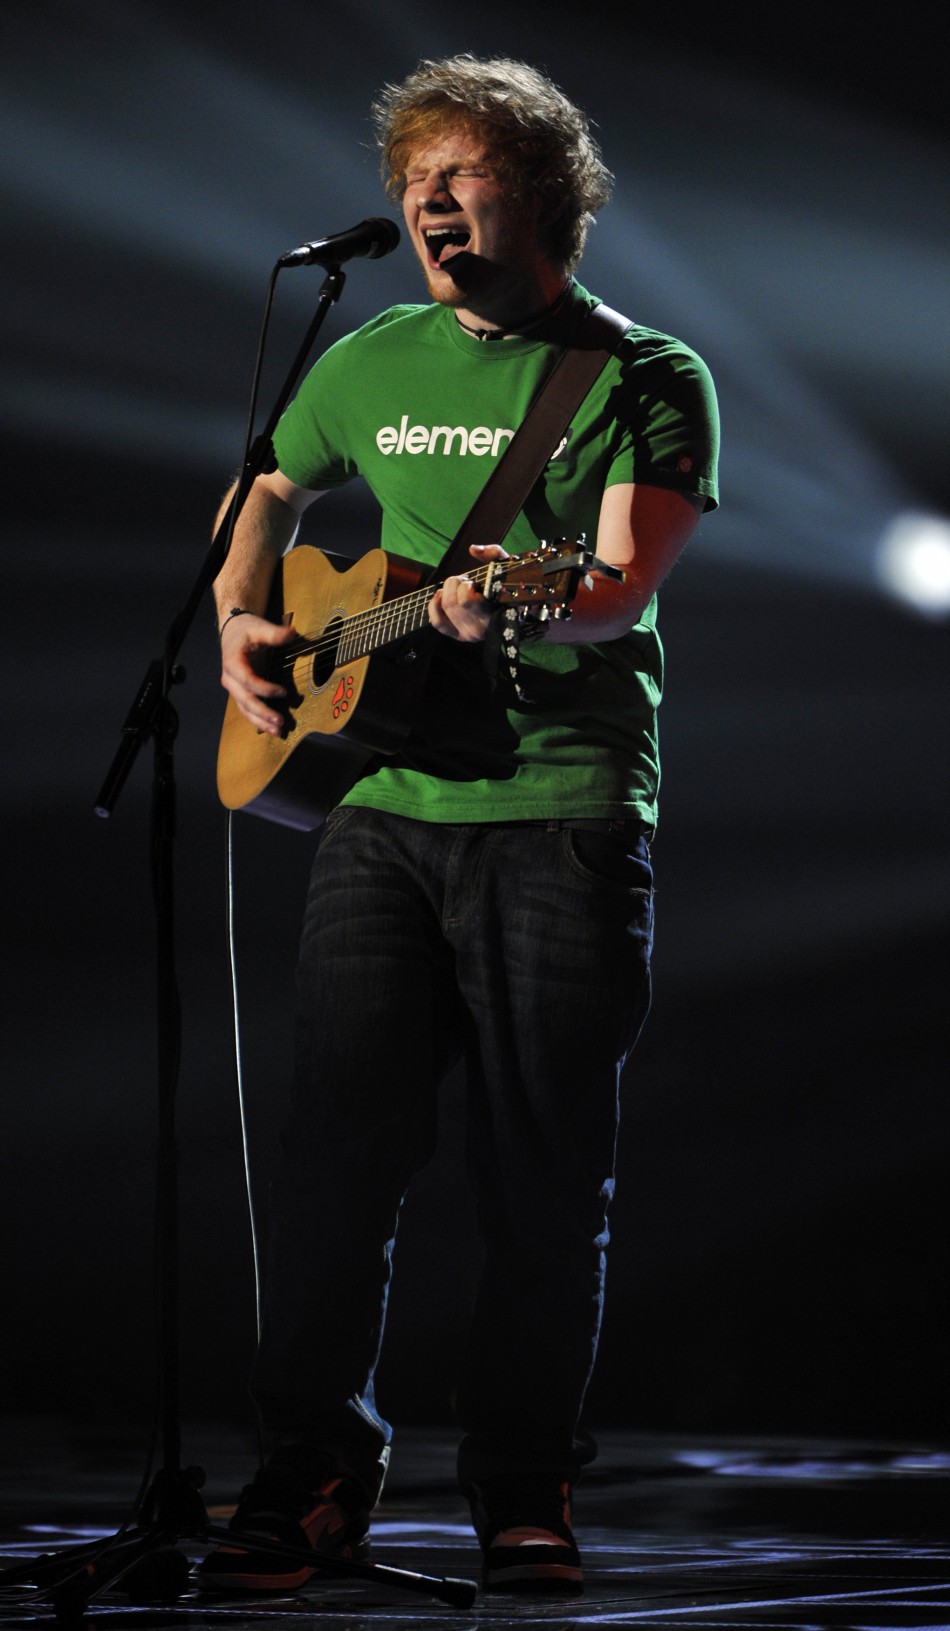 Ed Sheeran performs during the BRIT Music Awards at the O2 Arena in London